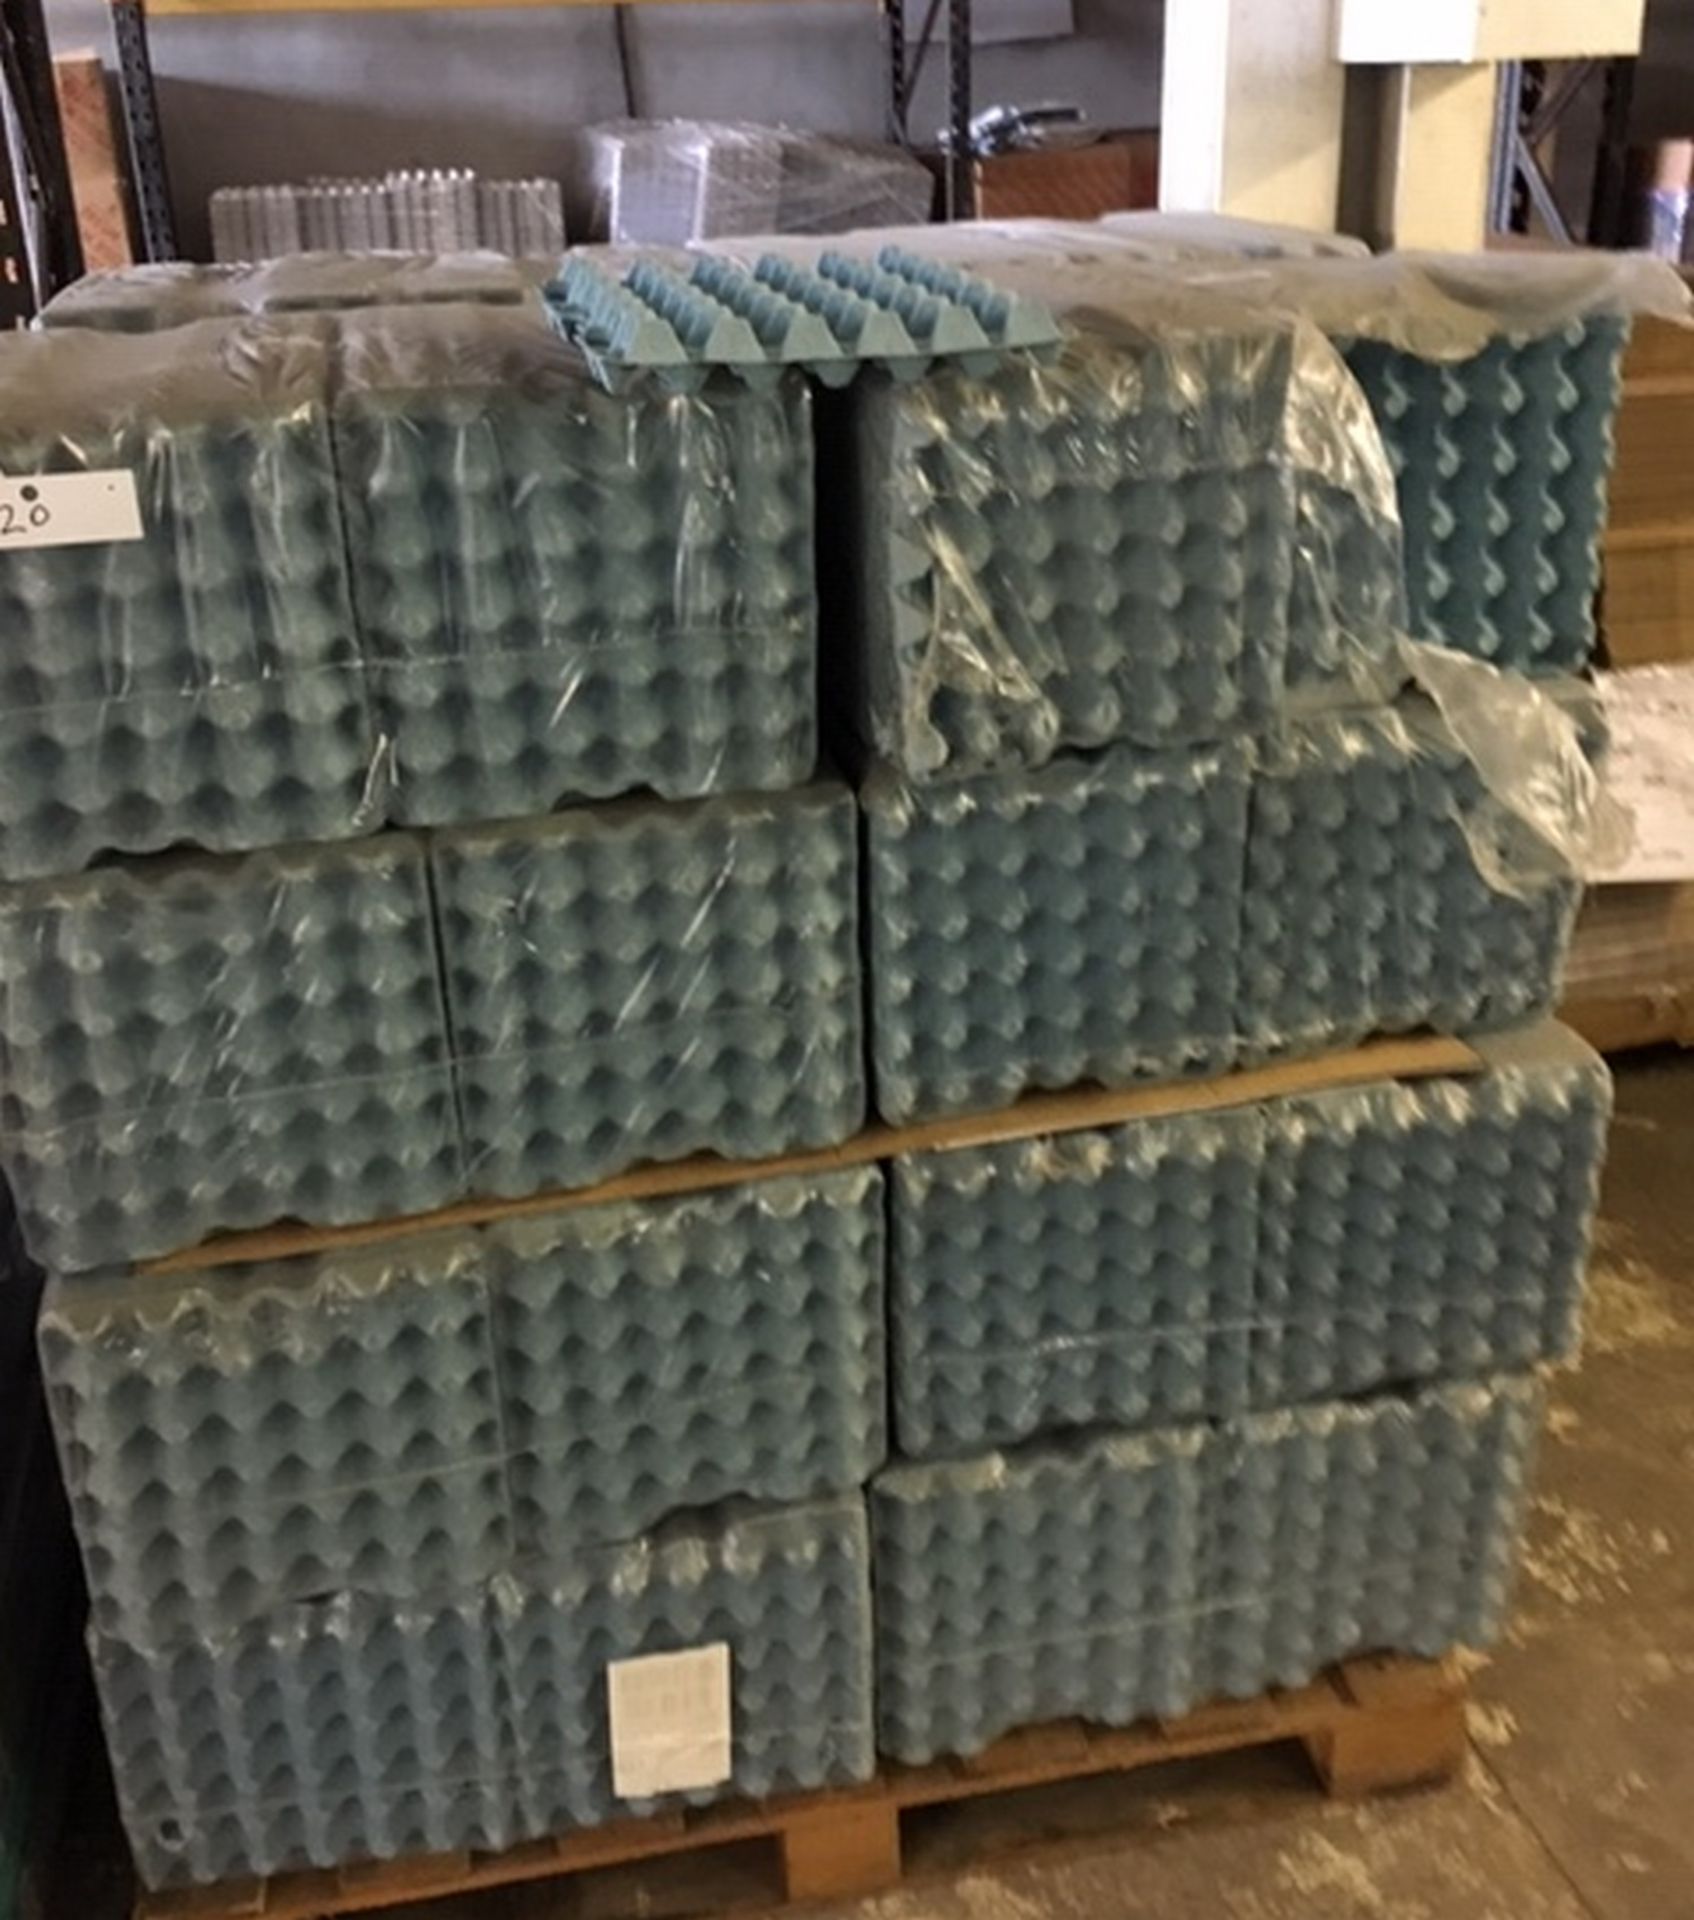 Pallet of 16 Lots of Egg Containers (36 Eggs) 160 Trays in each Lot.